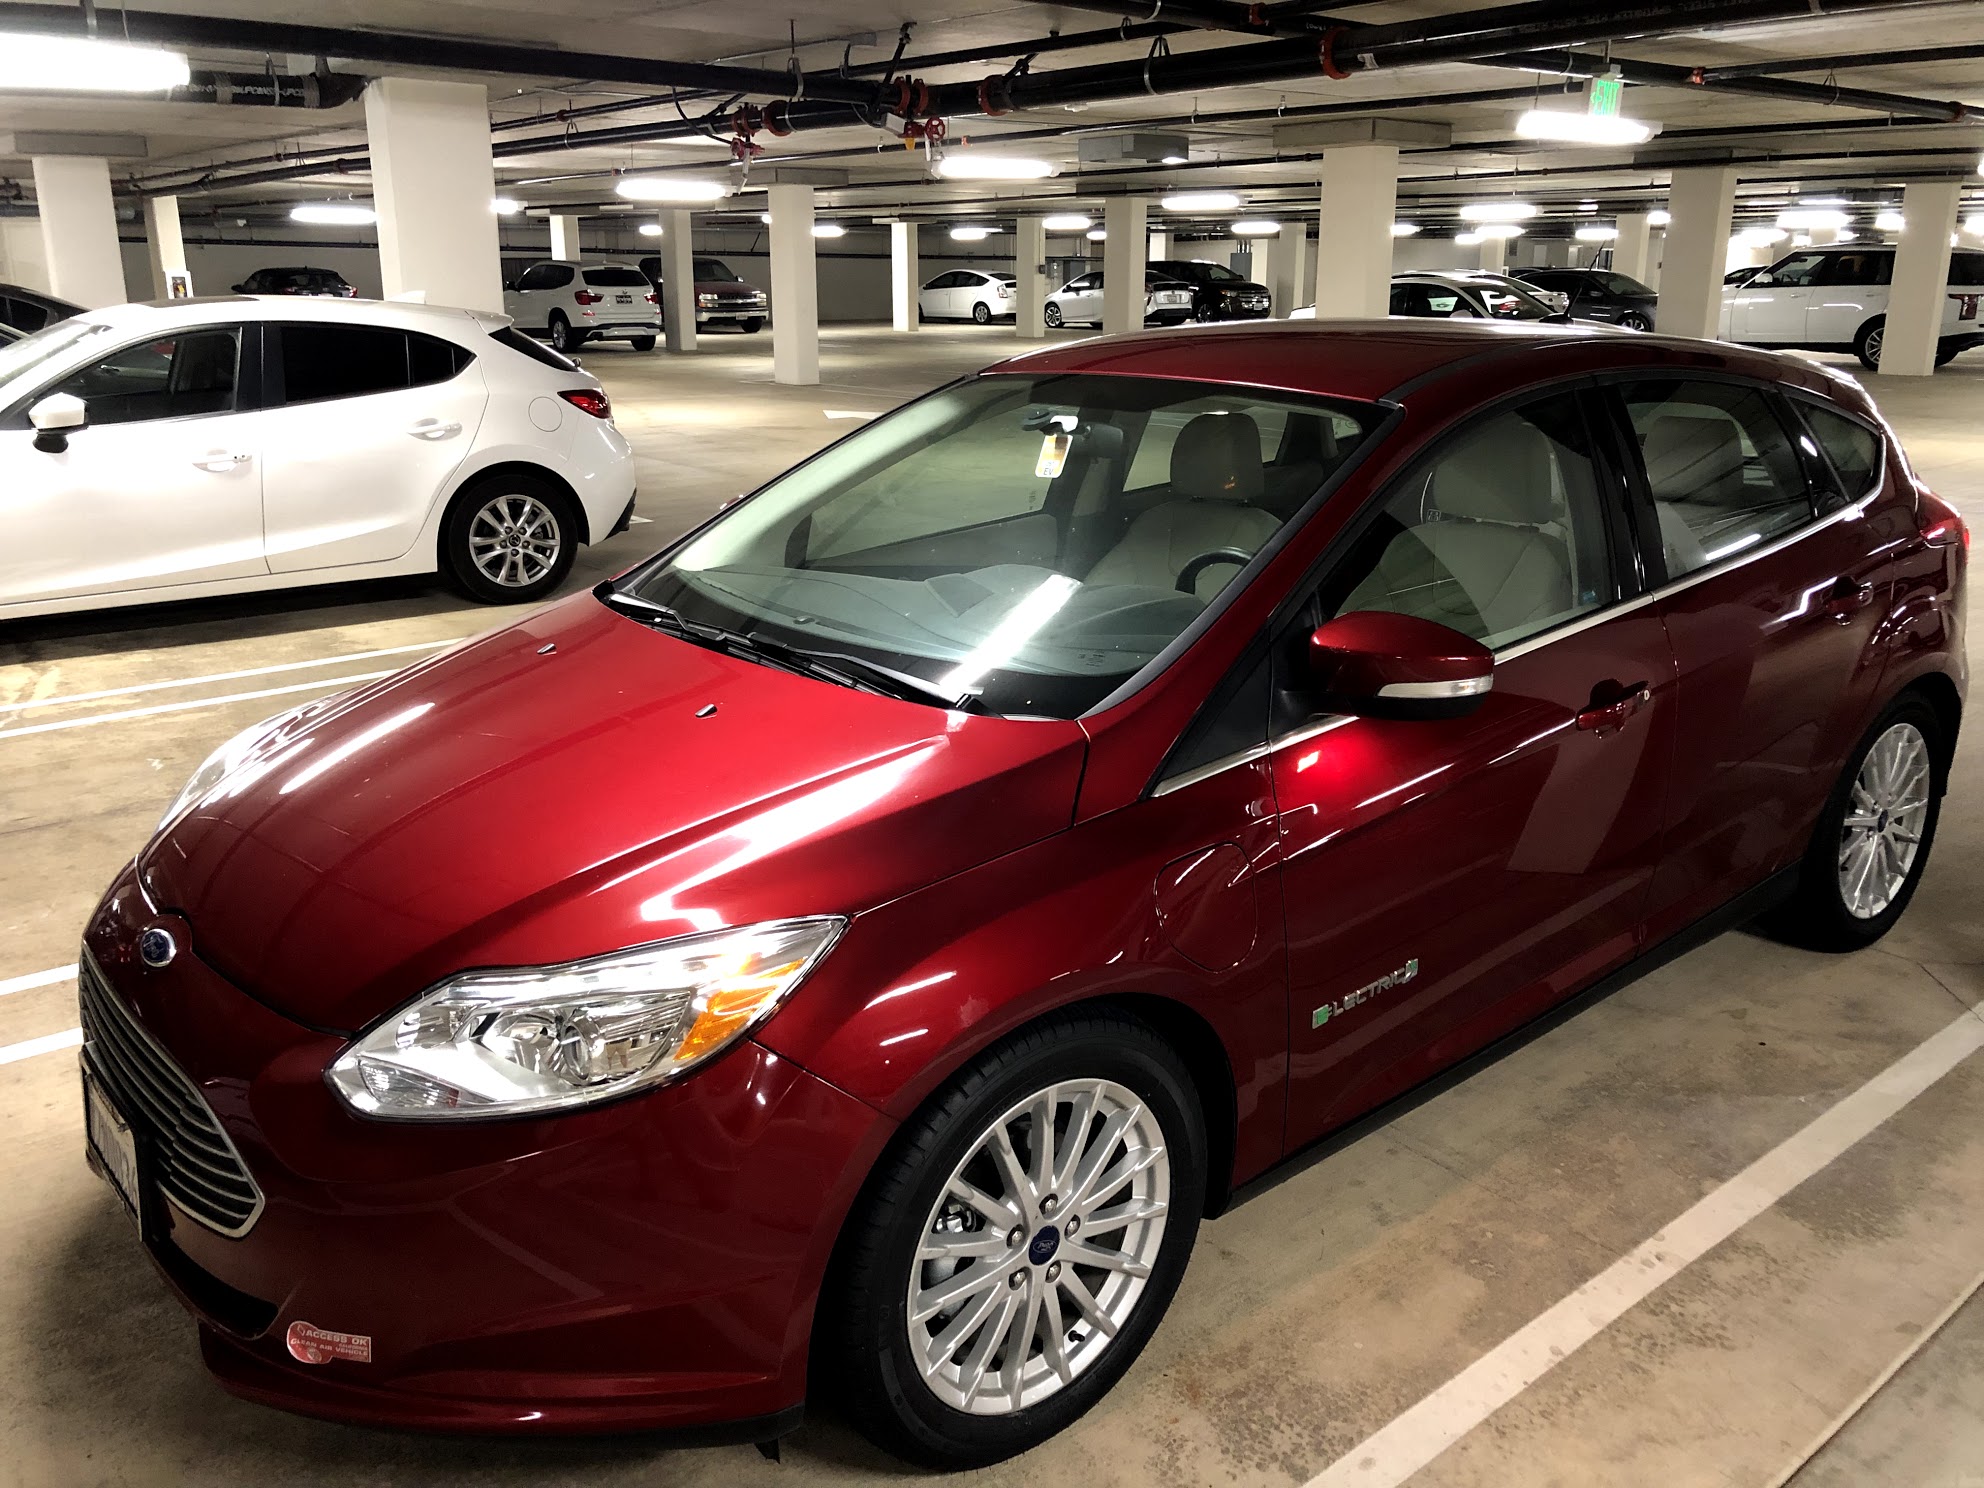 2017 Ford Focus Electric $240 Per Month 7 months left - Private Transfers -  FORUM | LEASEHACKR